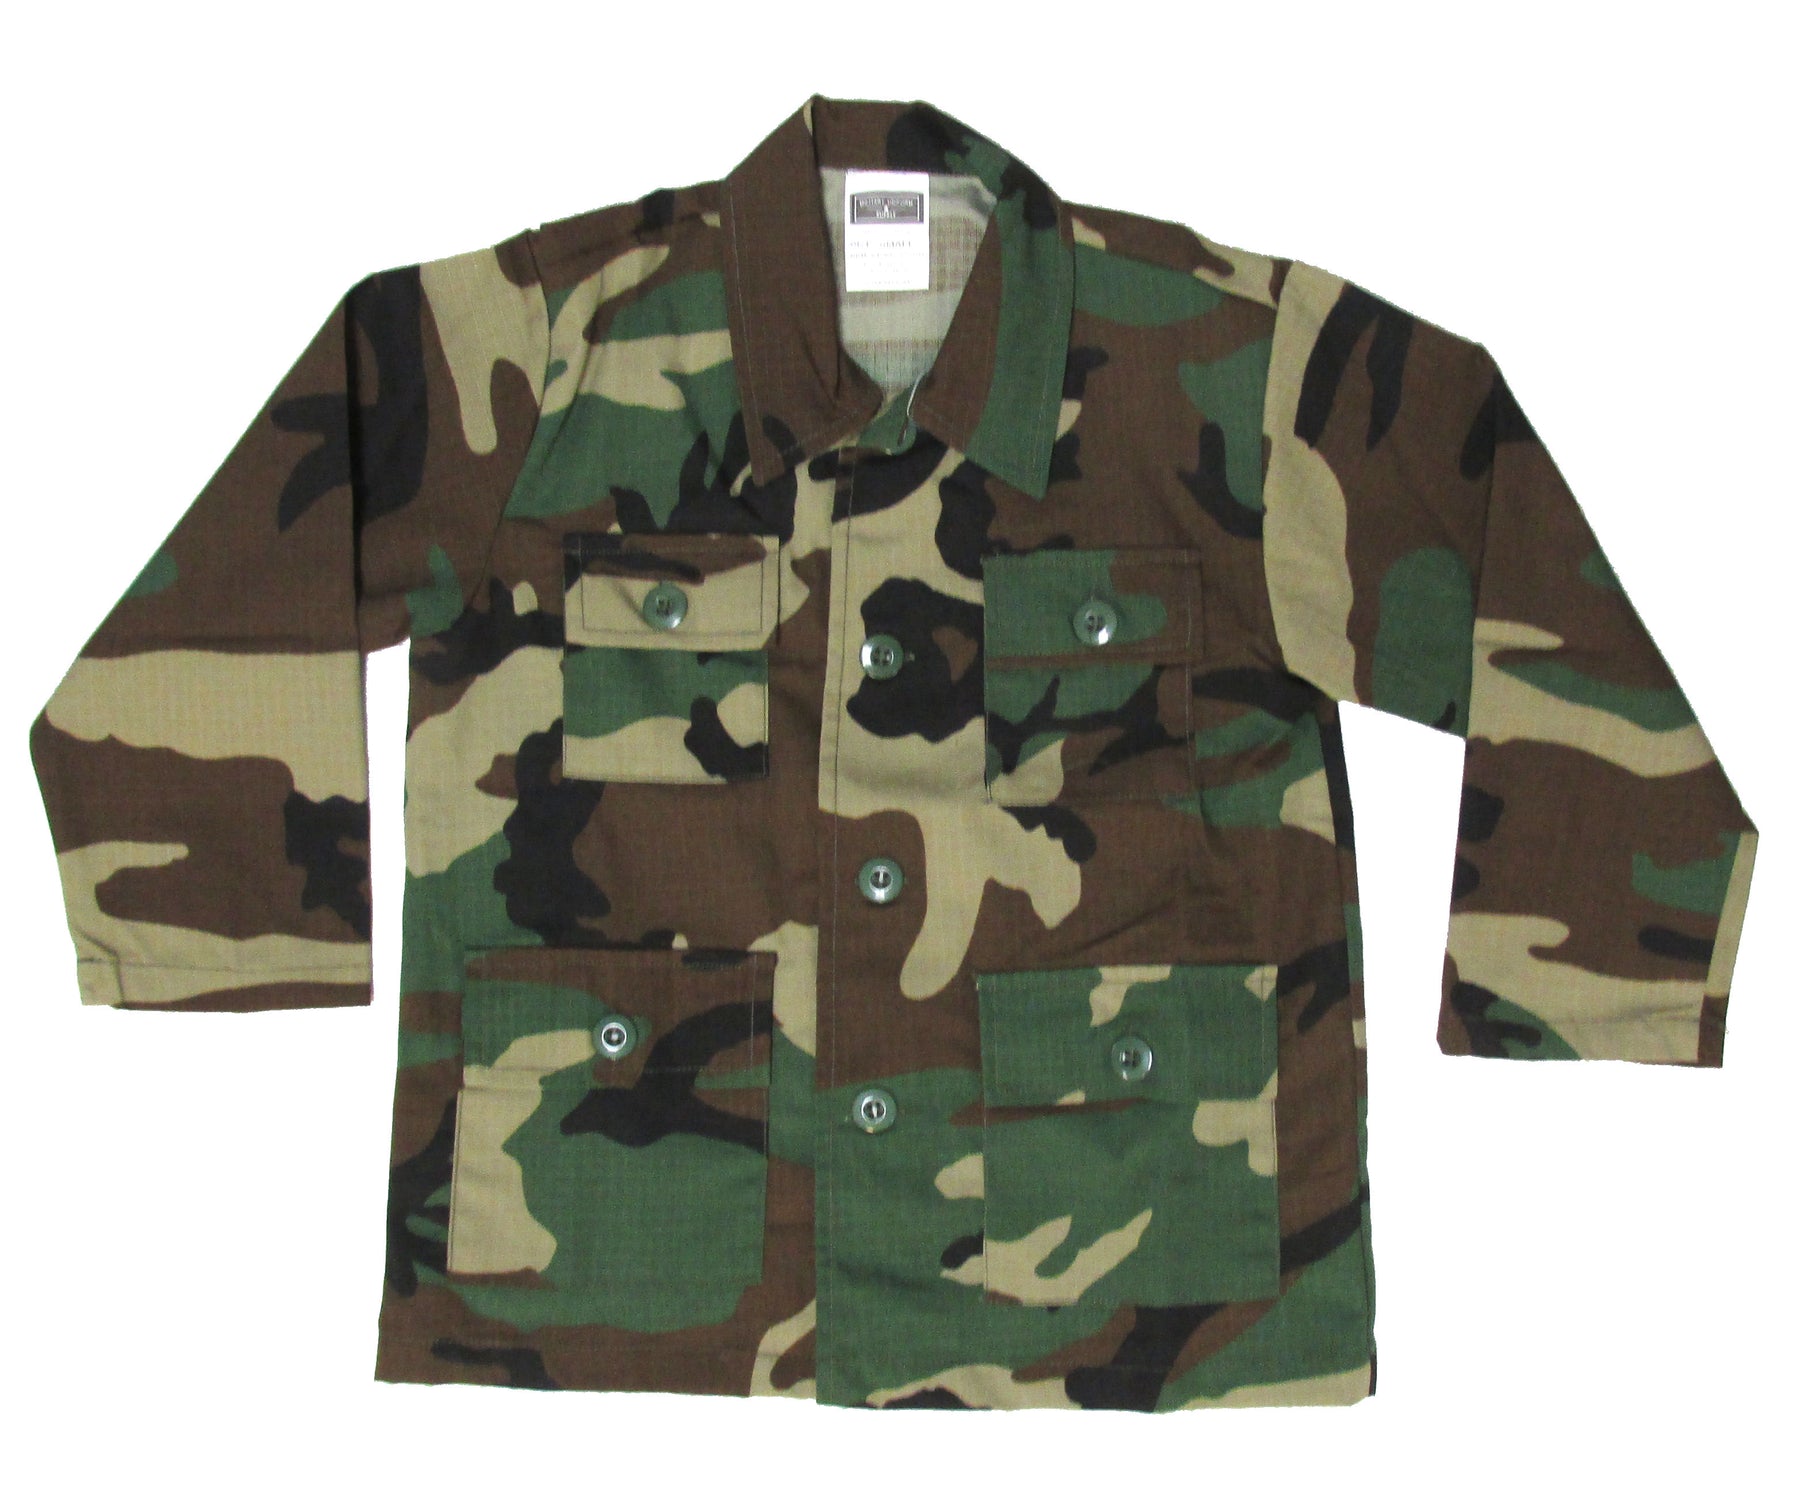 Mud Pie Kids Clothing Camouflage Canvas Ruffle Jacket 4T-5T - Digs N Gifts